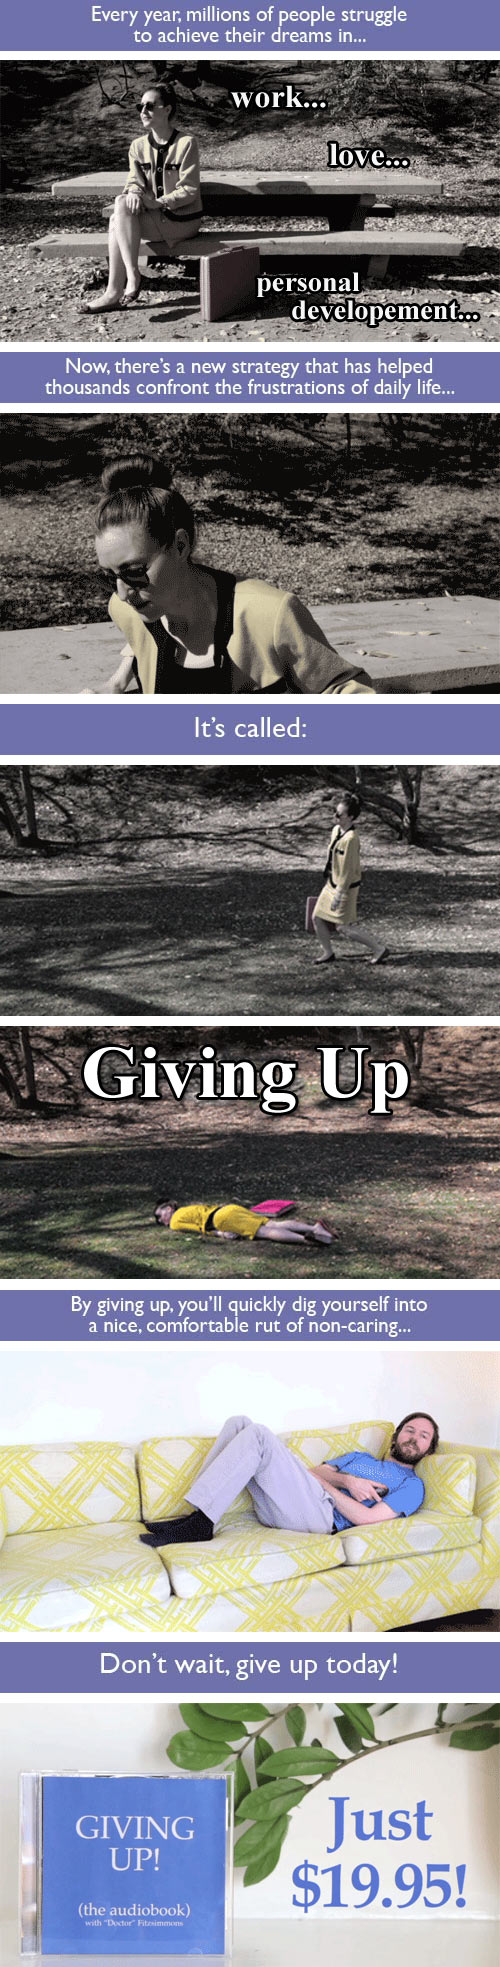 Giving up.